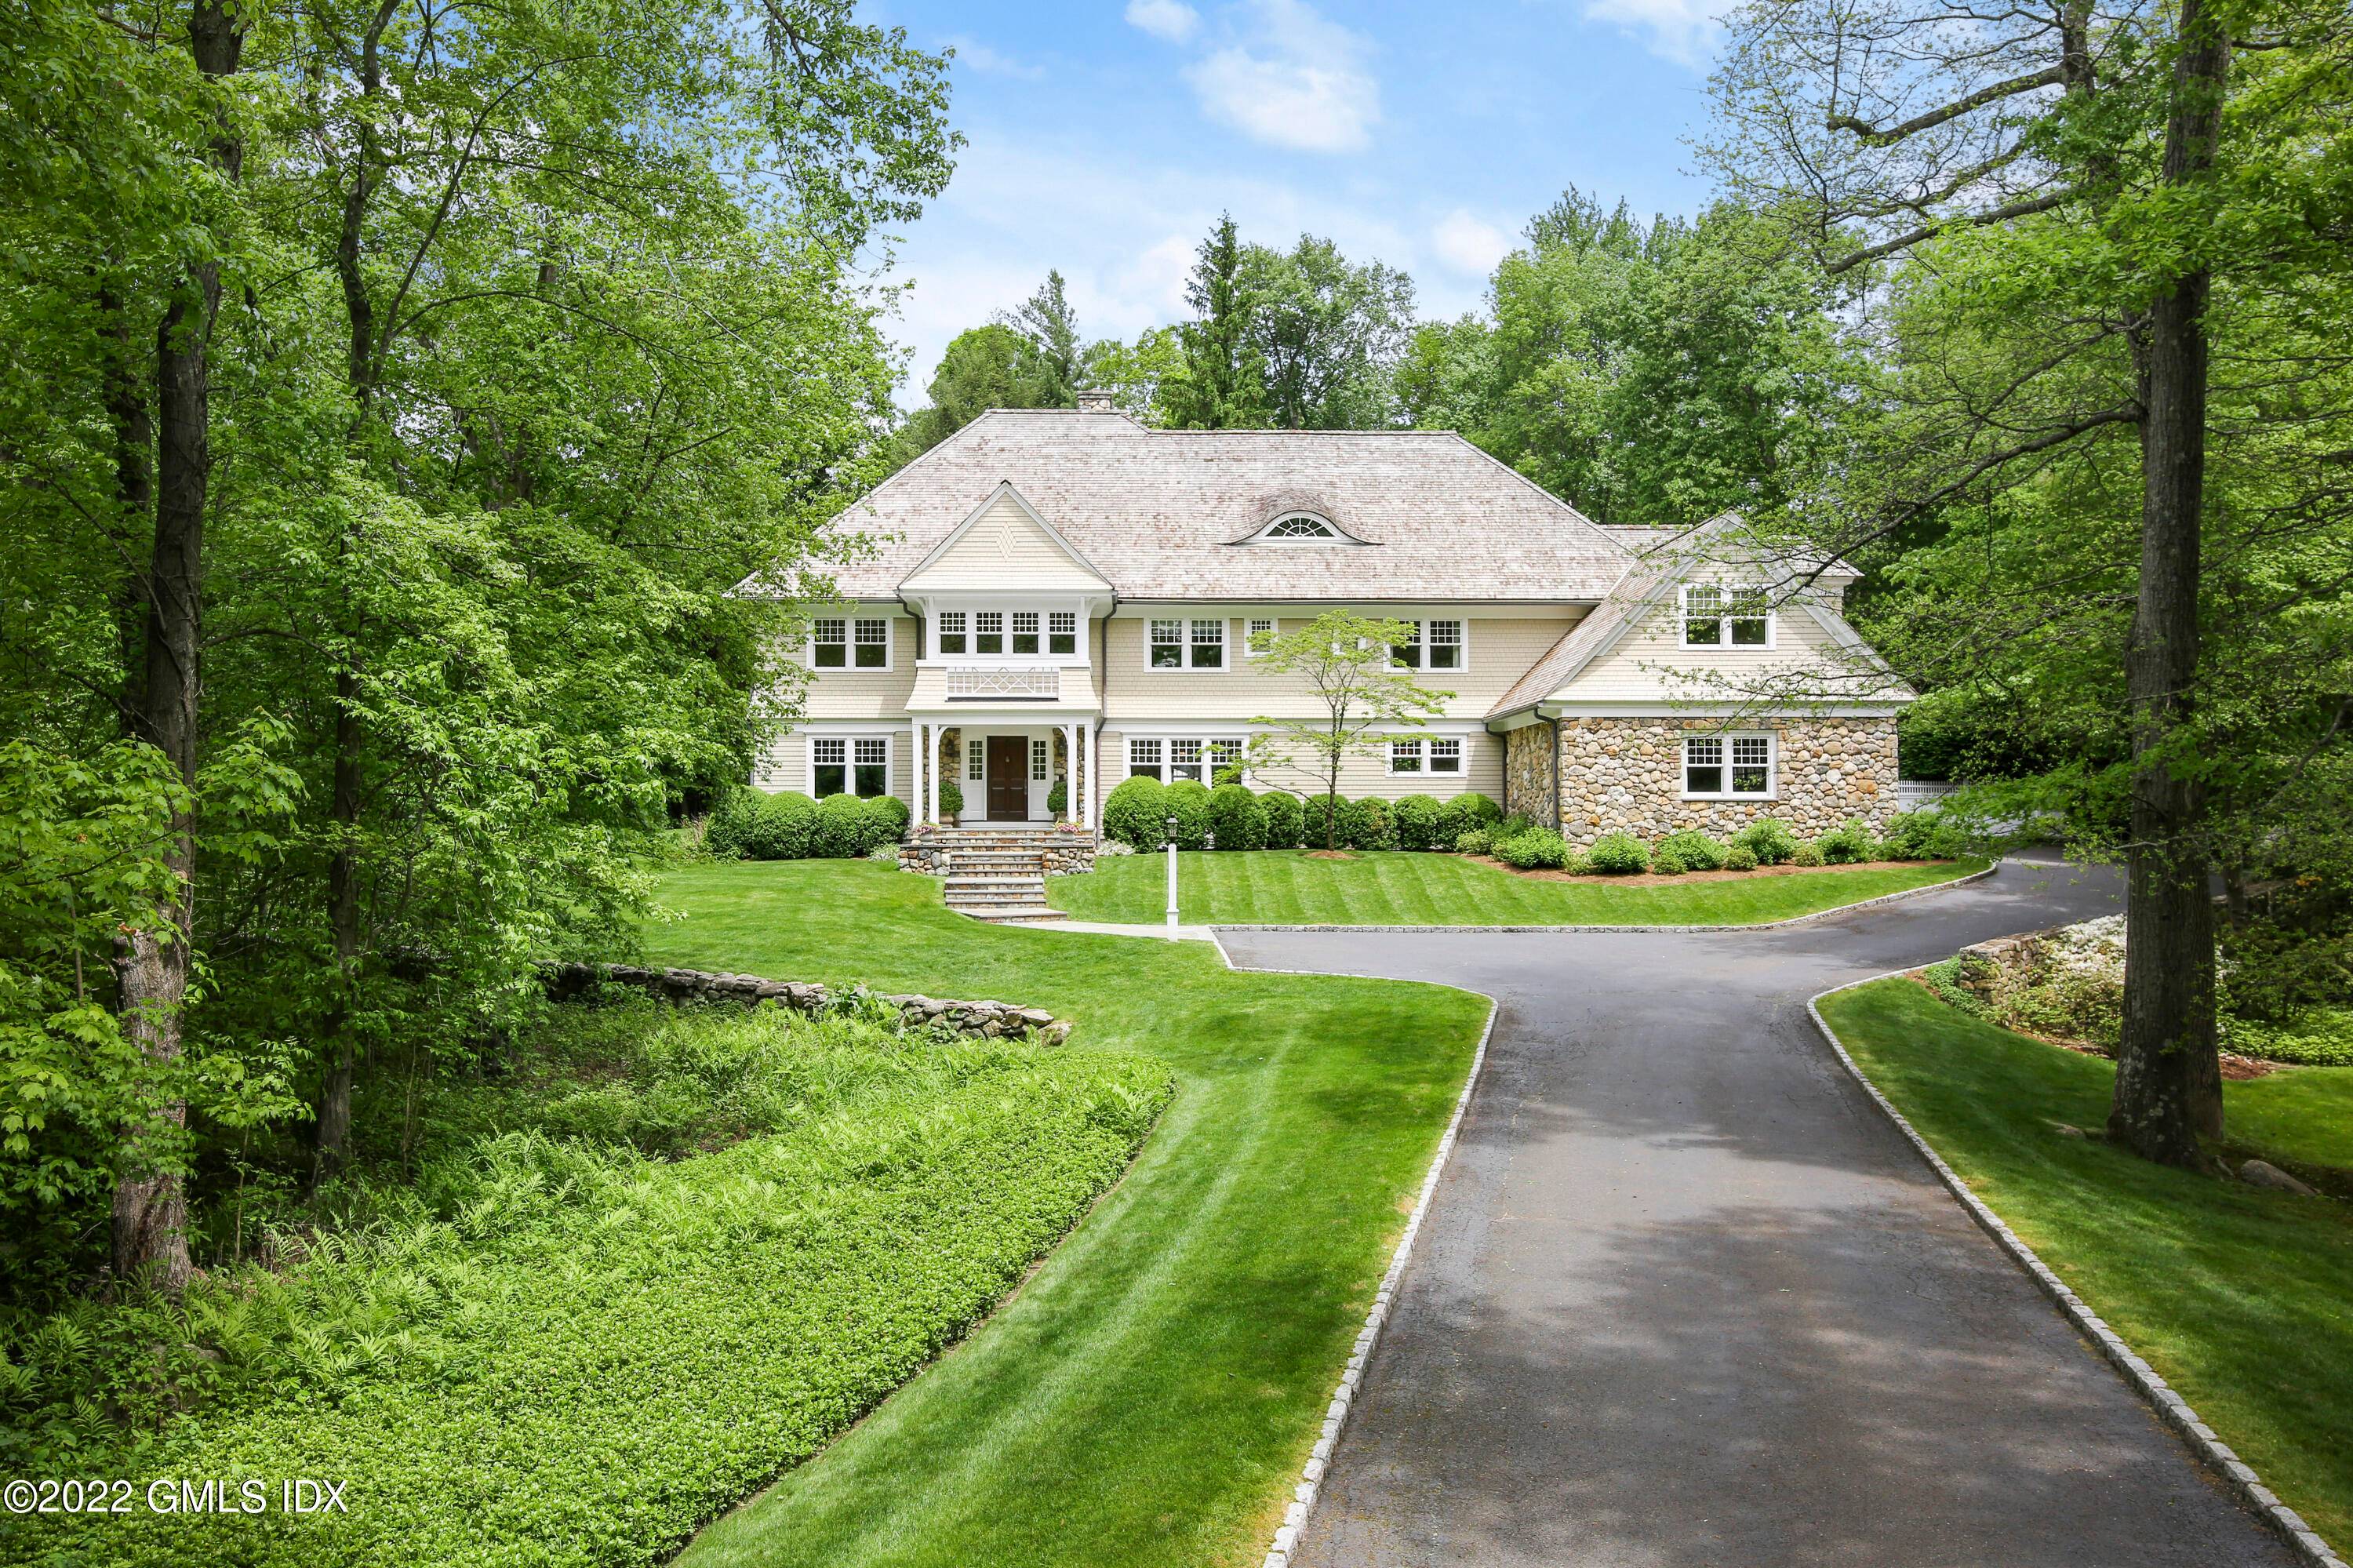 Stunning six bedroom stone shingle home, custom built by owners designed by noted architect, Neil Hauck, on coveted, circular lane neighborhood near town and schools.